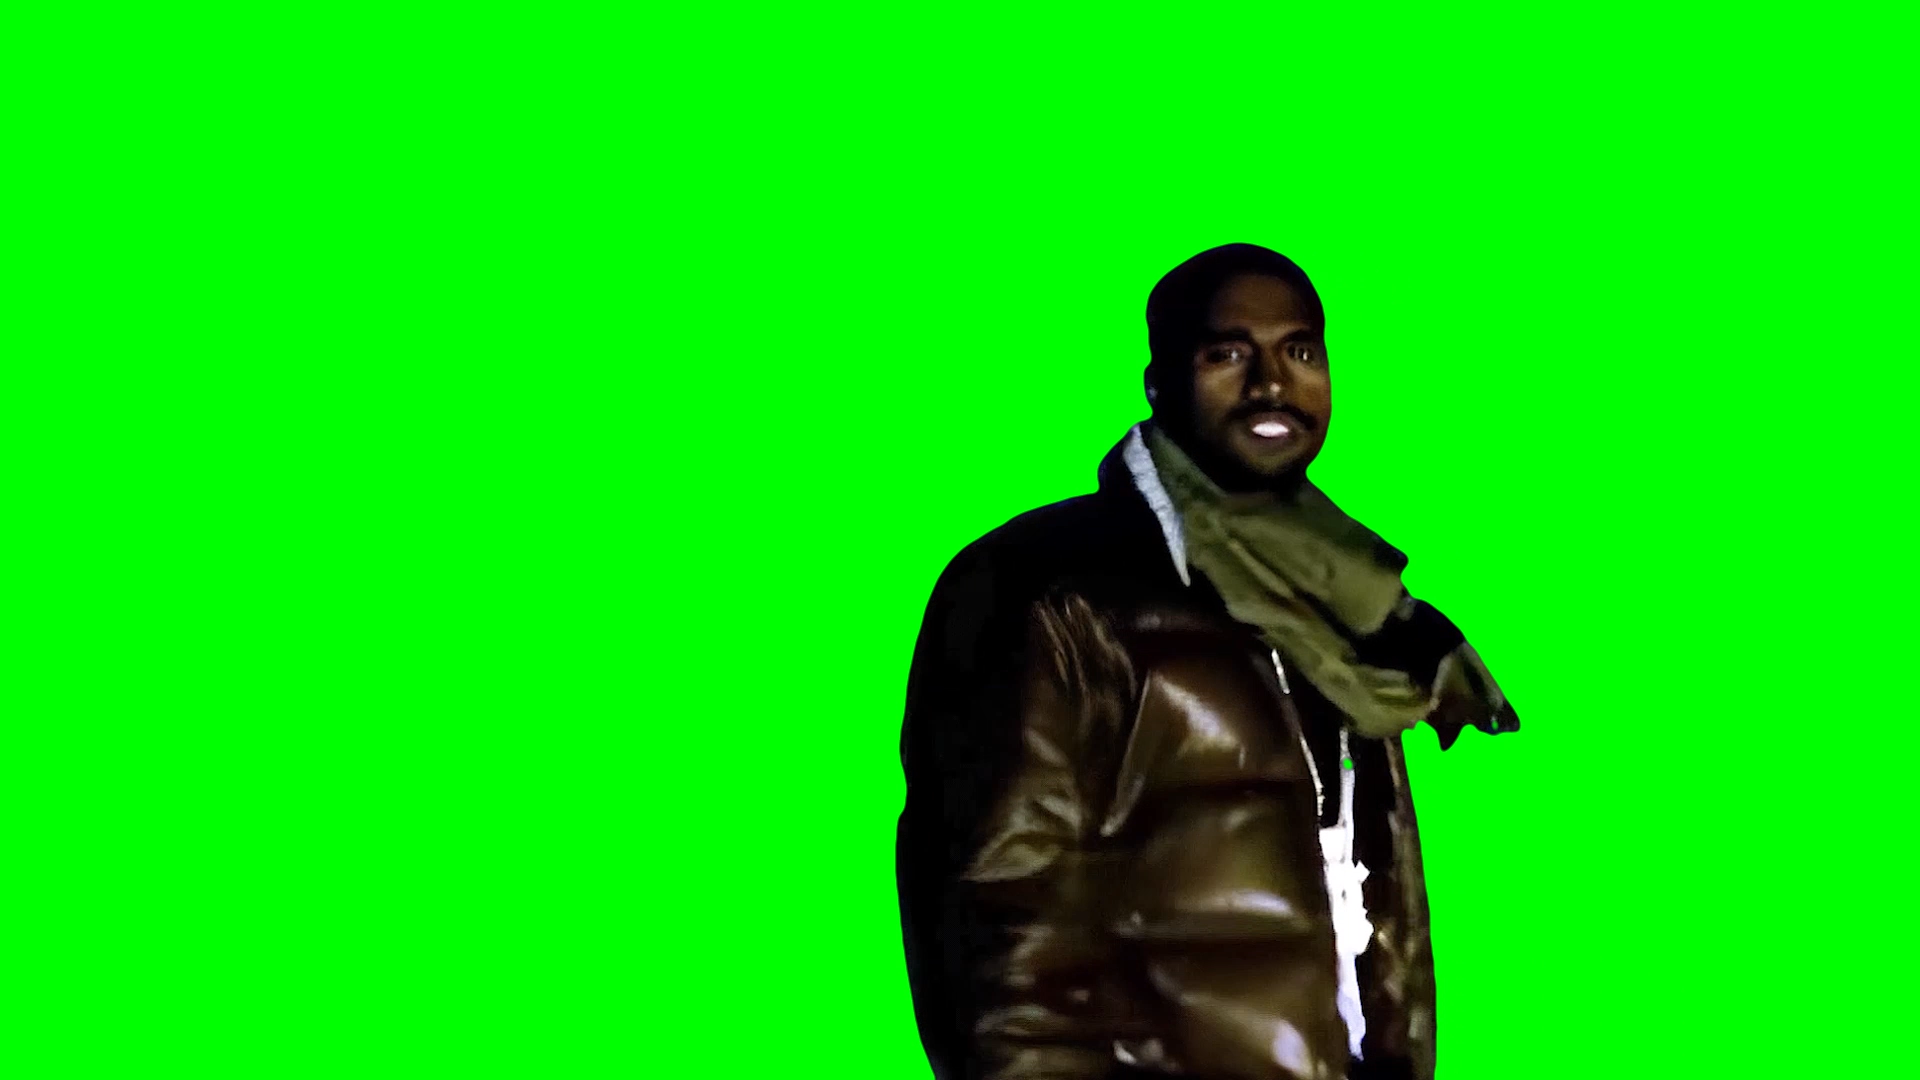 Kanye West - You can't tell me nothing! (Green Screen)